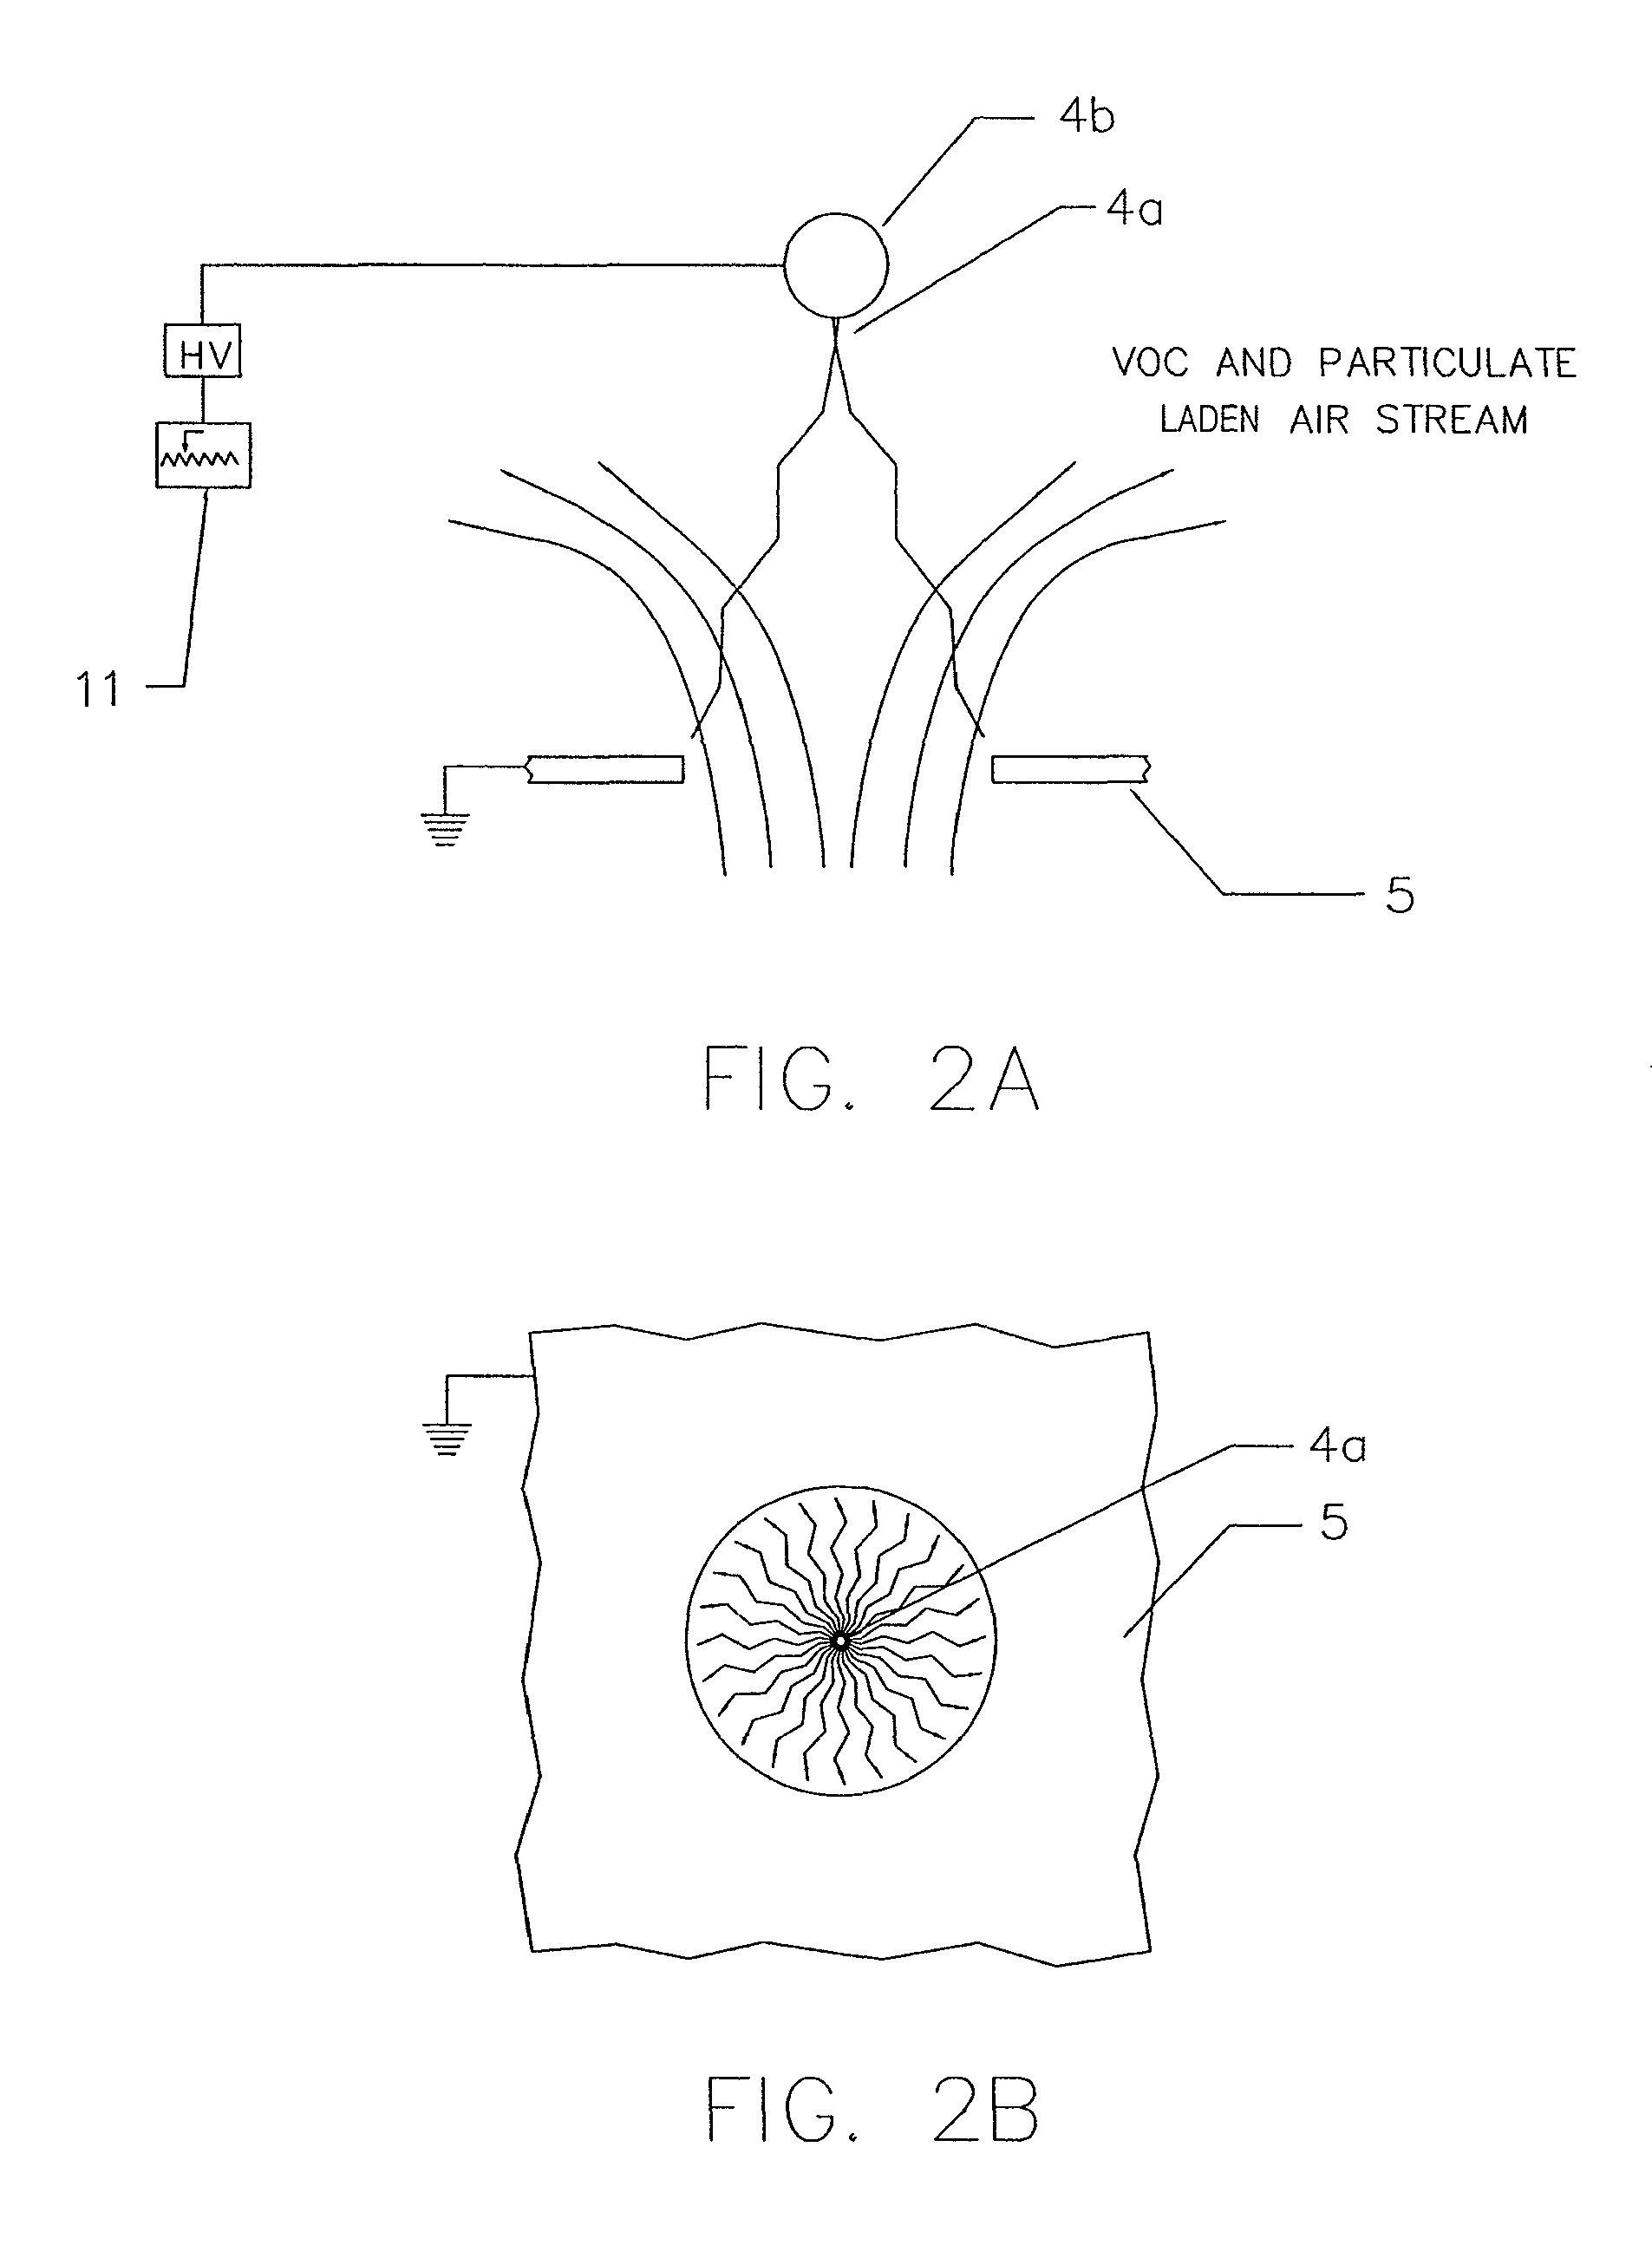 Apparatus for removal of particles and VOC from an airstream